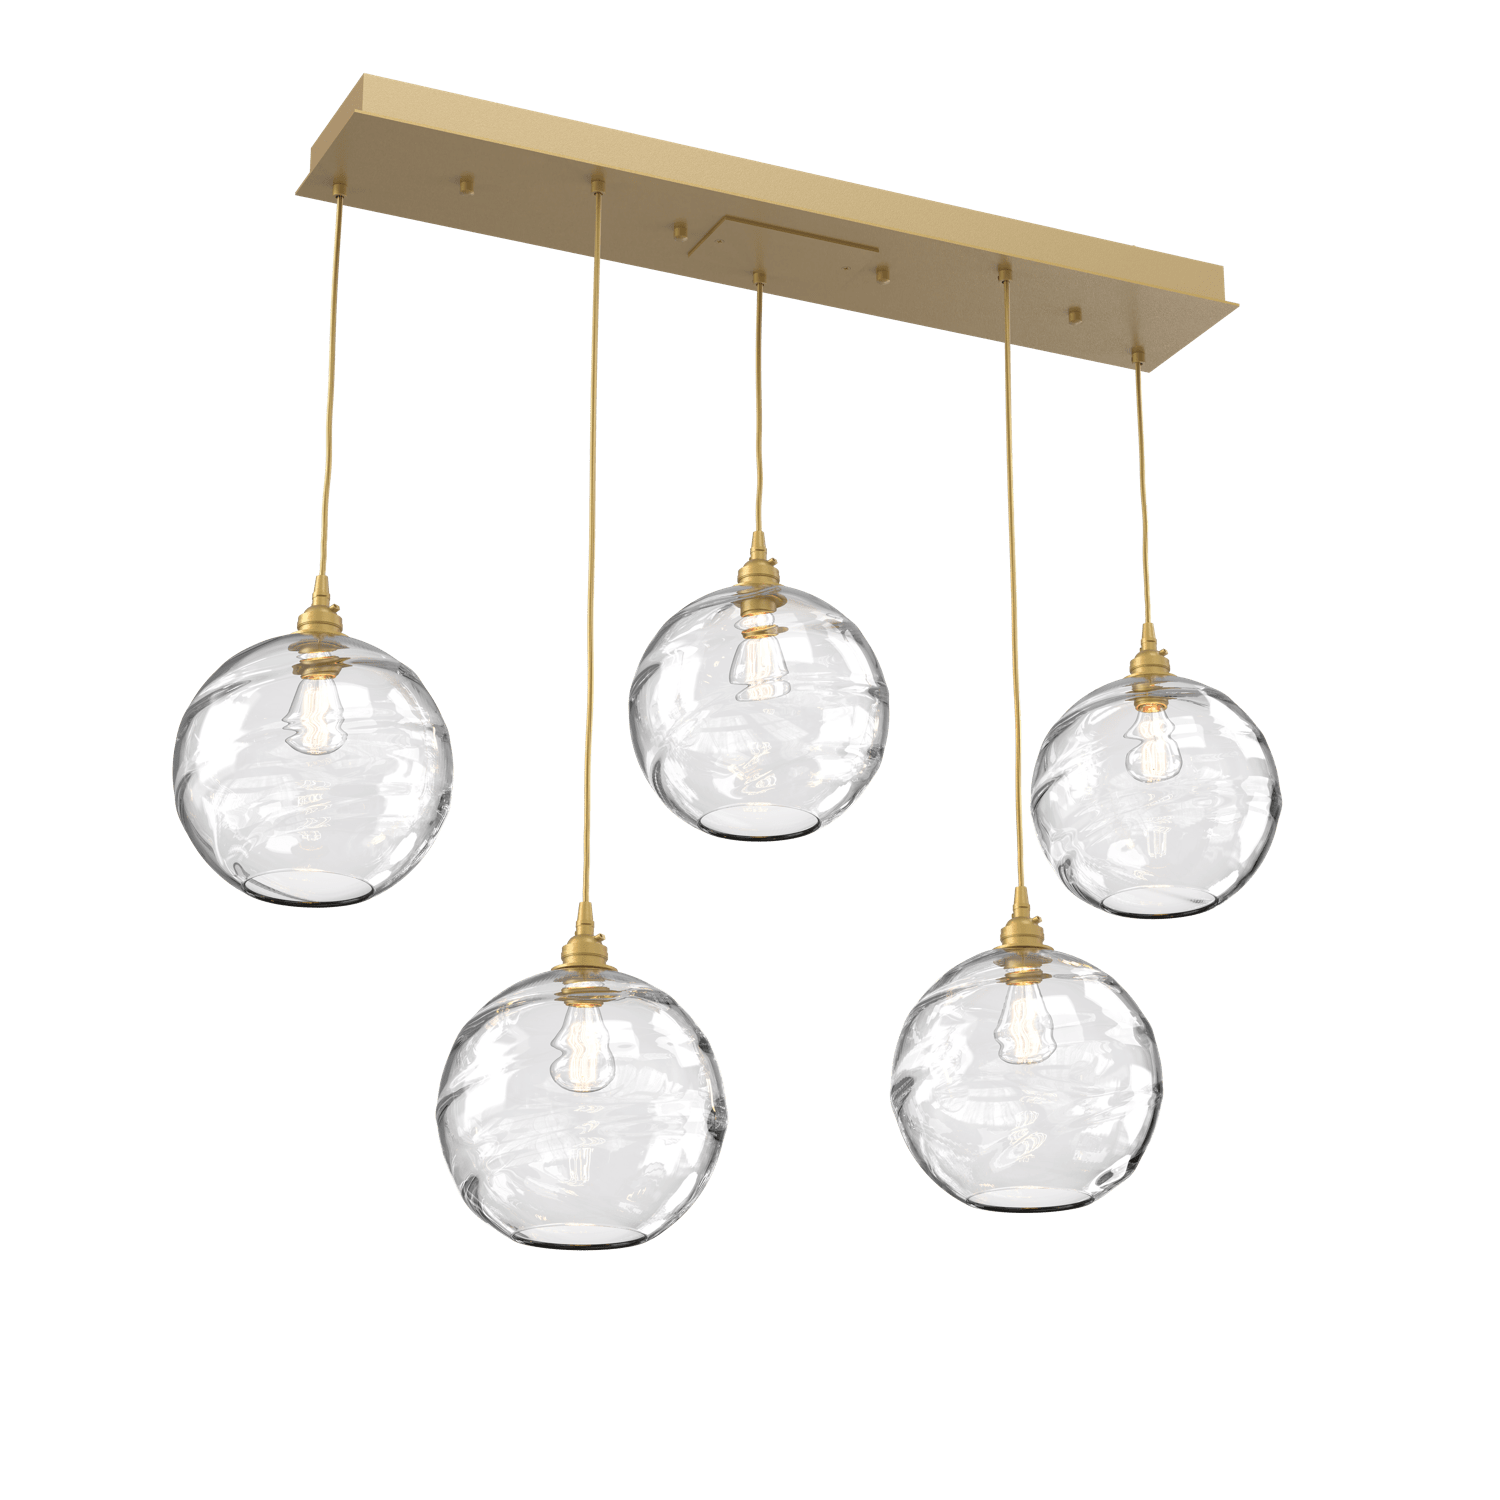 PLB0047-05-GB-OC-Hammerton-Studio-Optic-Blown-Glass-Terra-5-light-linear-pendant-chandelier-with-gilded-brass-finish-and-optic-clear-blown-glass-shades-and-incandescent-lamping